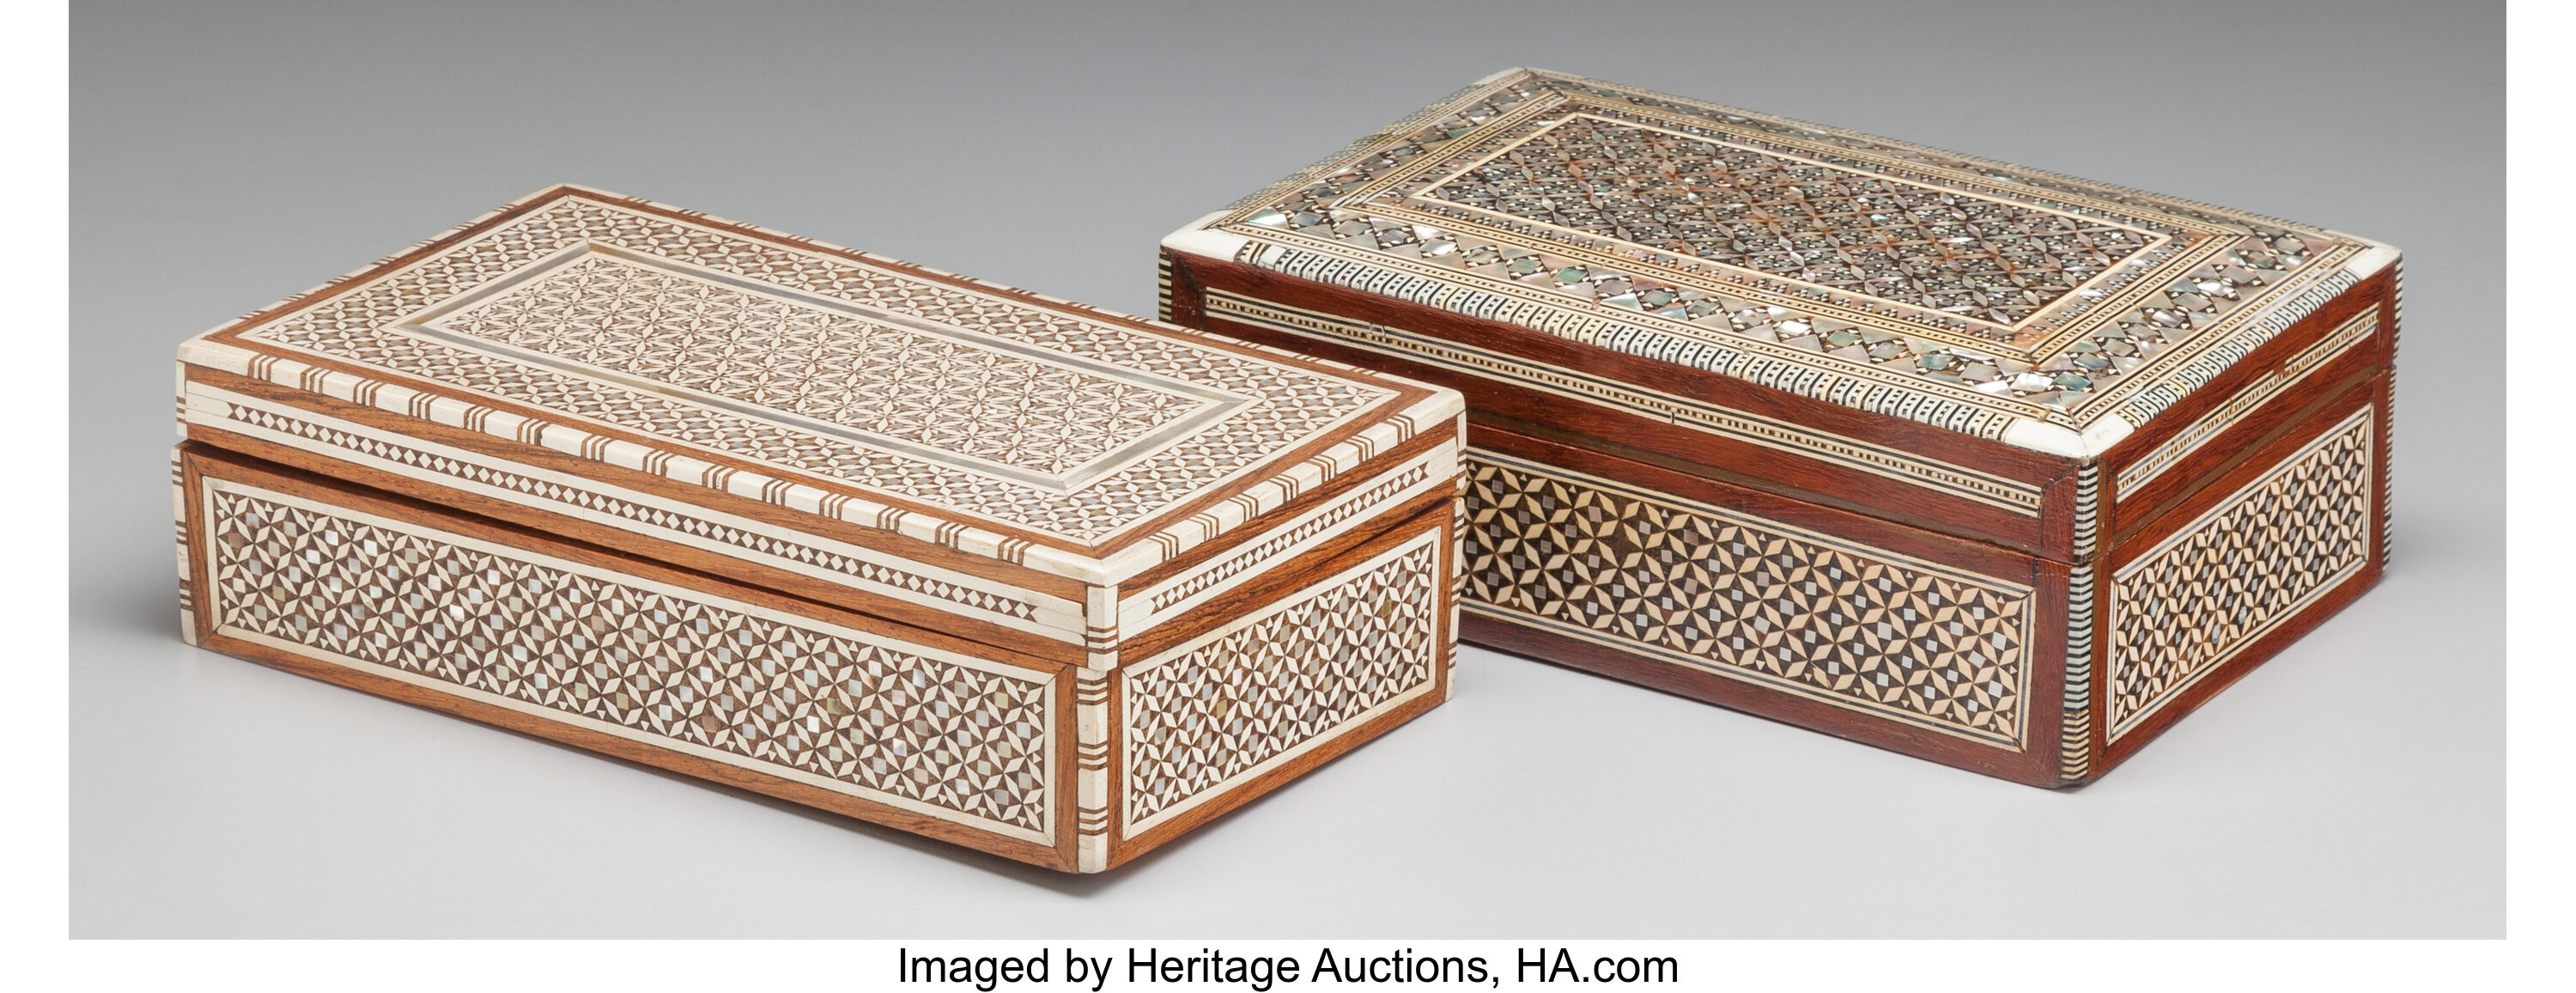 A Pair Of Inlaid Boxes With Mother Of Pearl Bone Abalone Shell Lot 280 Heritage Auctions